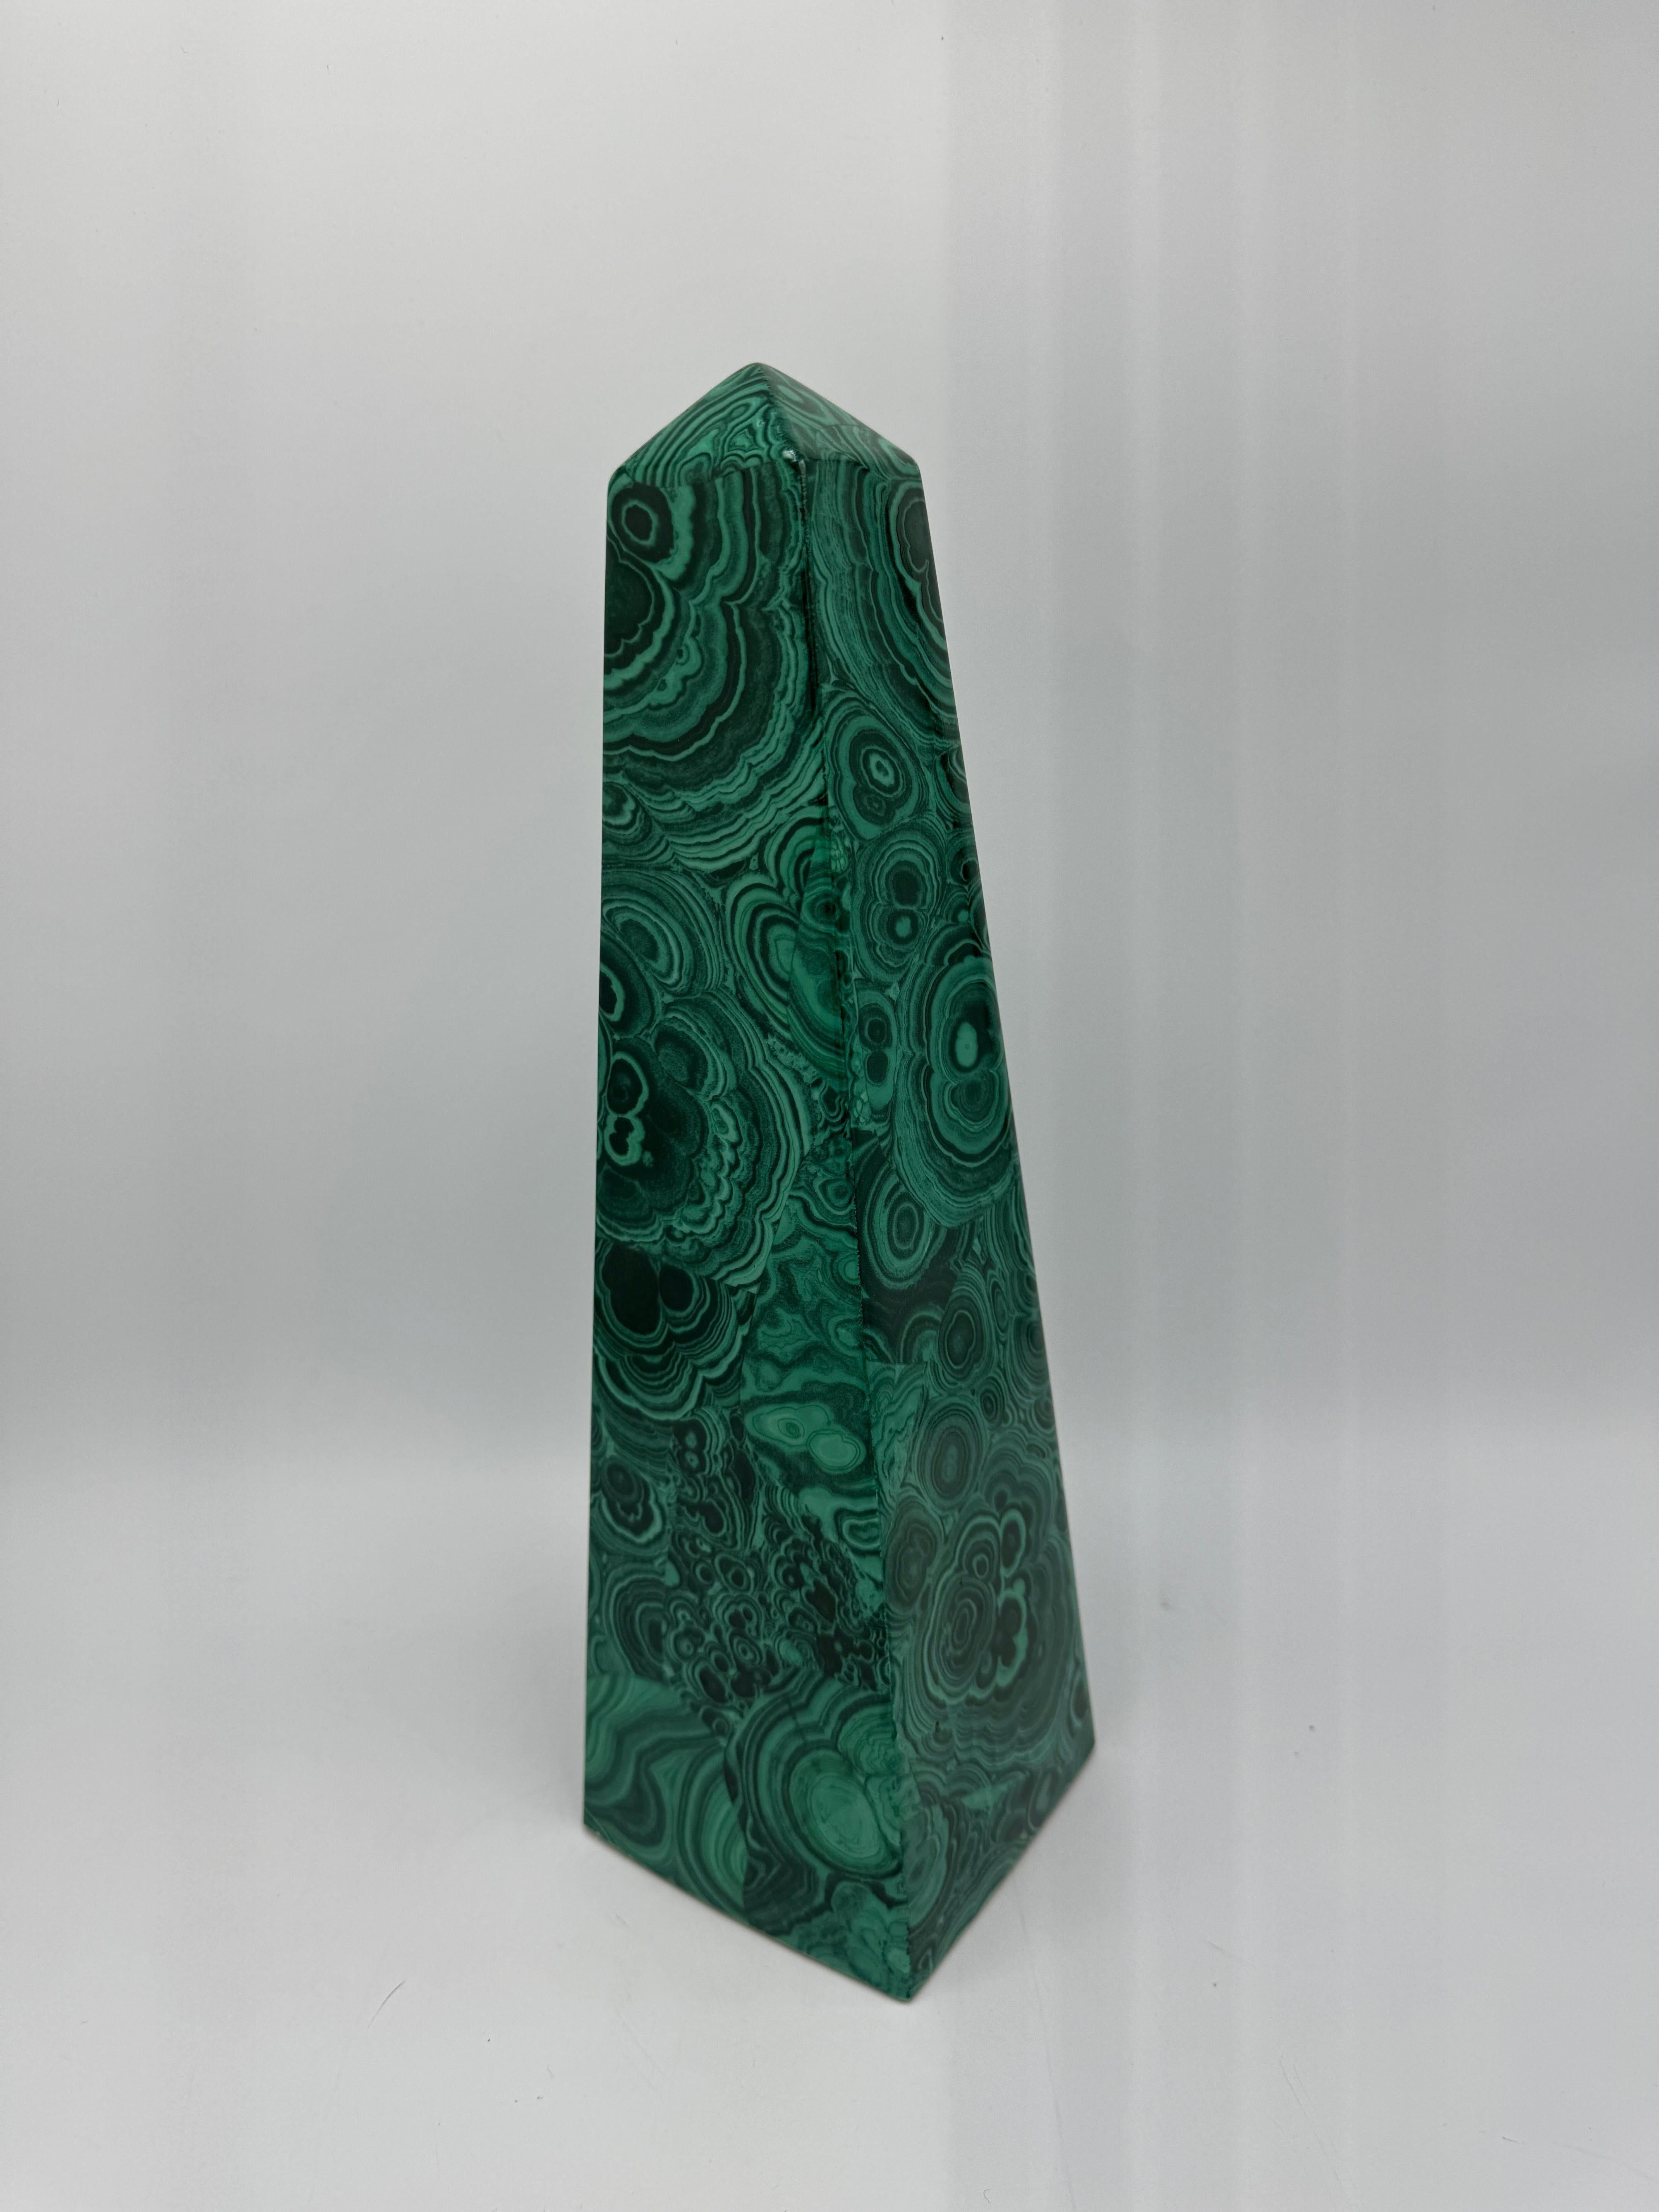 Offered is a fabulous, 1970s porcelain obelisk with a faux malachite design all over, attributed to Neiman Marcus' malachite design porcelain collection. Tall, standing just over 14in. Felt pads on underside. Hollow, but heavy - weighing 2.1lbs. Due